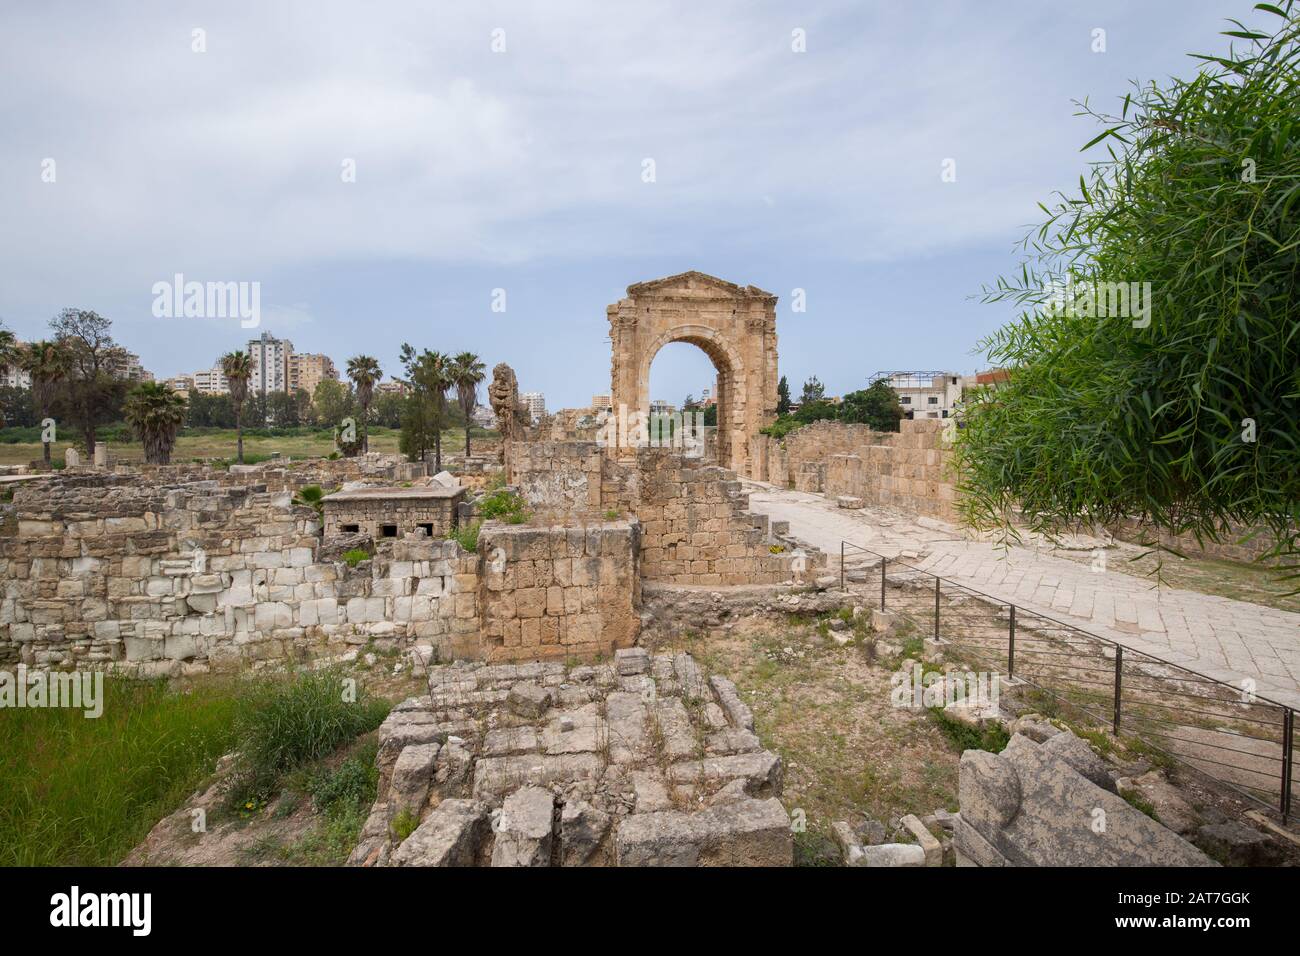 The arch of triumph and the Byzantine road. Roman remains in Tyre. Tyre is an ancient Phoenician city. Tyre, Lebanon - June, 2019 Stock Photo